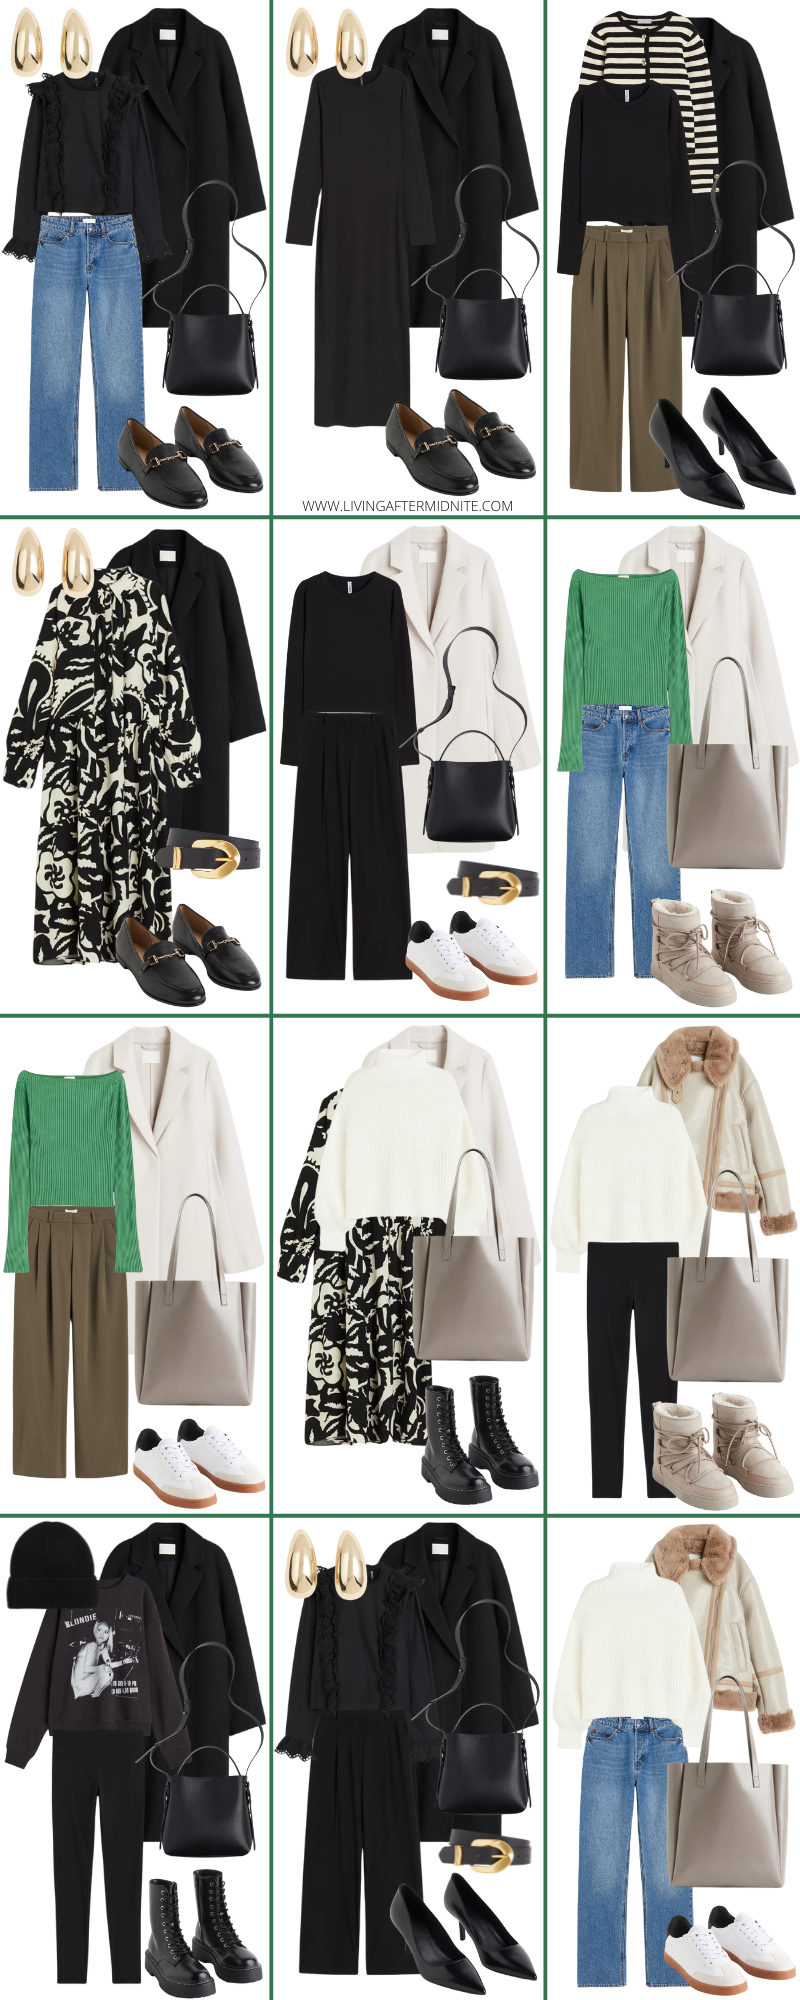 These Are The 9 Winter Essentials You Need For A Capsule Wardrobe